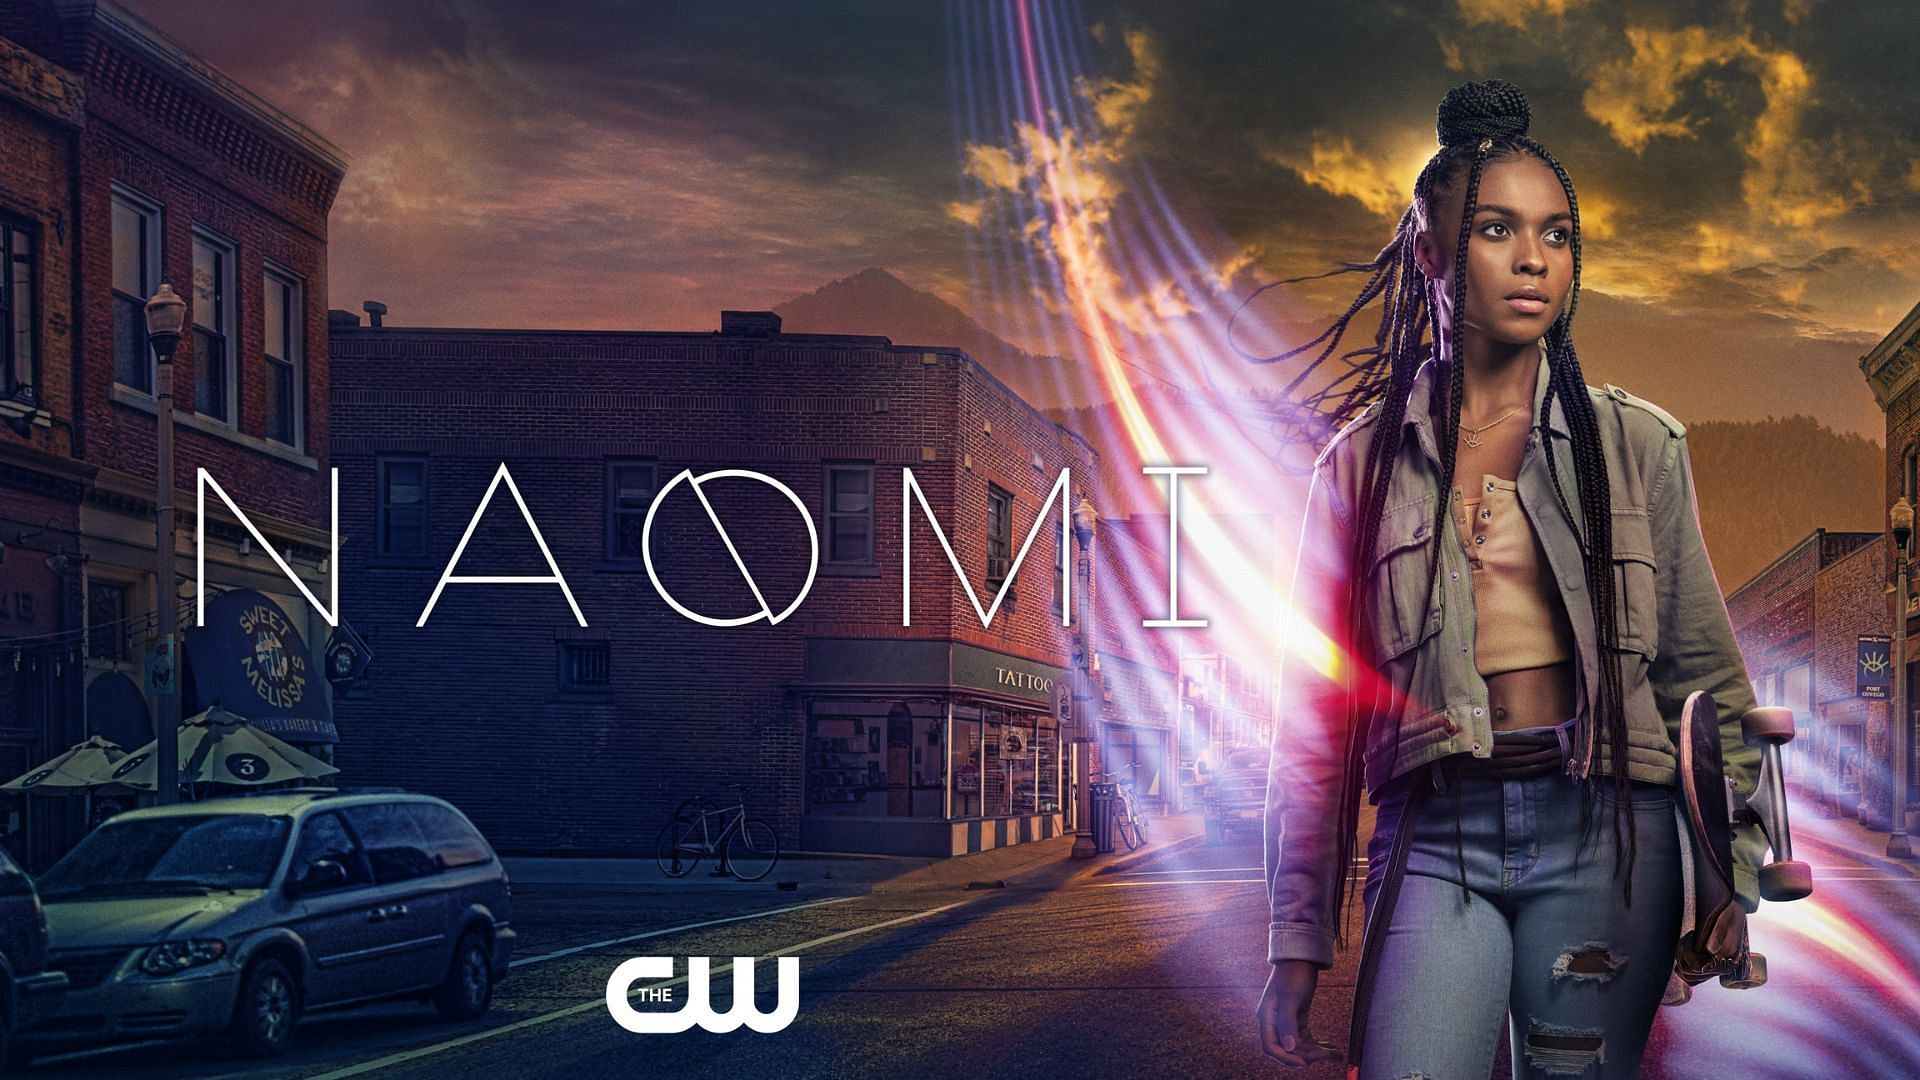 A promotional poster for Naomi (Image via Rotten Tomatoes)